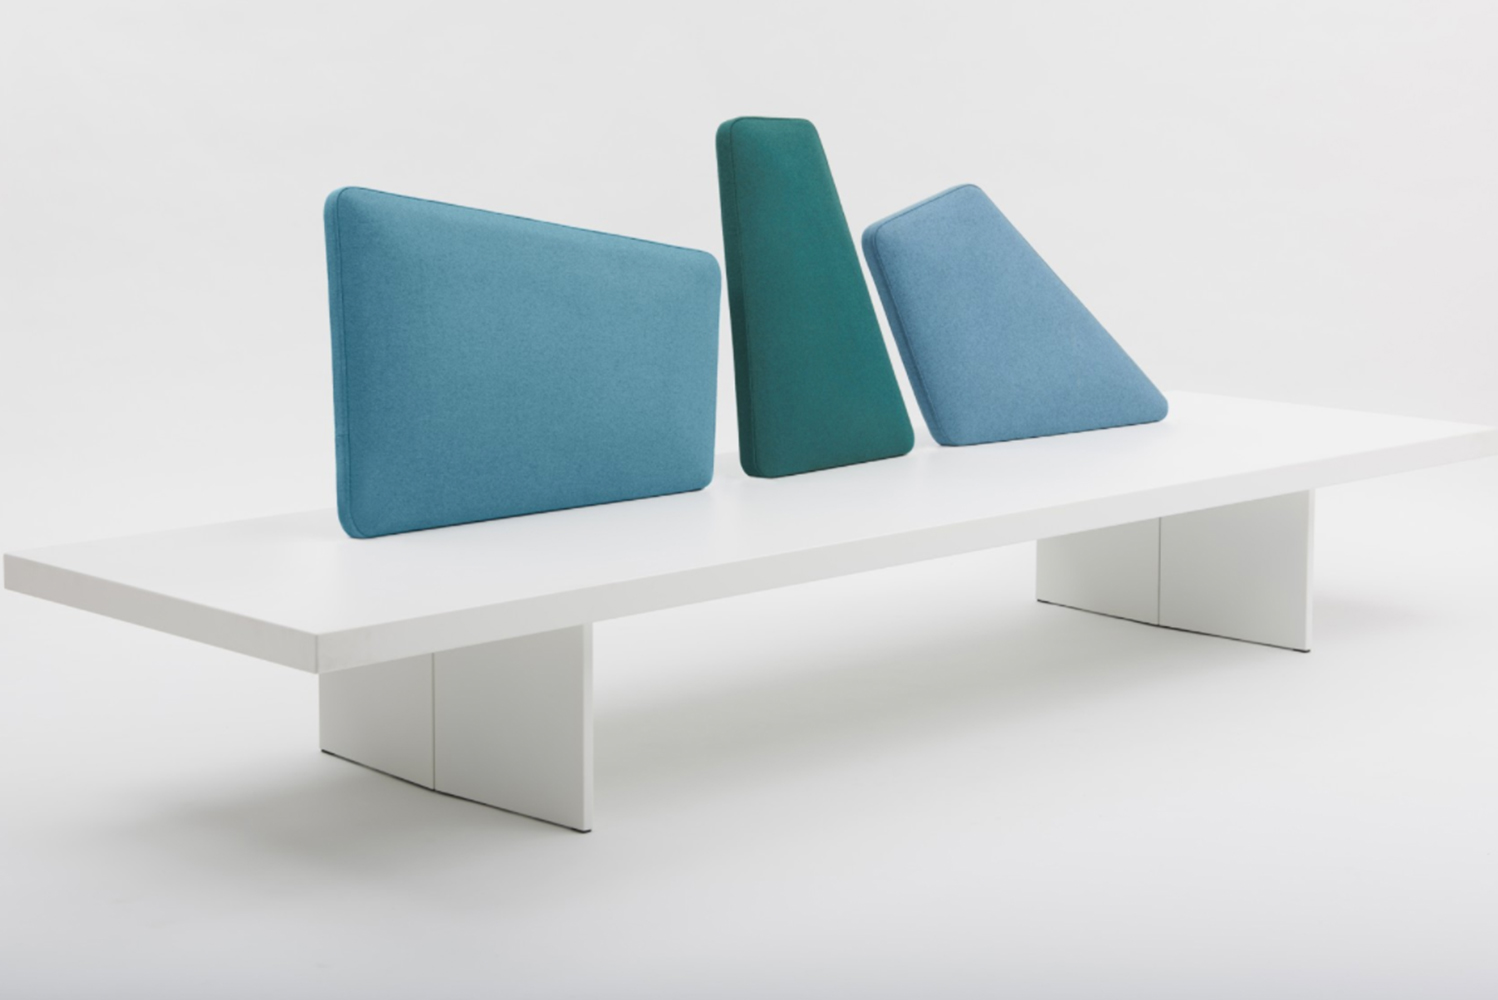 Italian furniture brand Segis launched the Iceland bench which mimics the icy crags of glaciers found throughout Iceland 